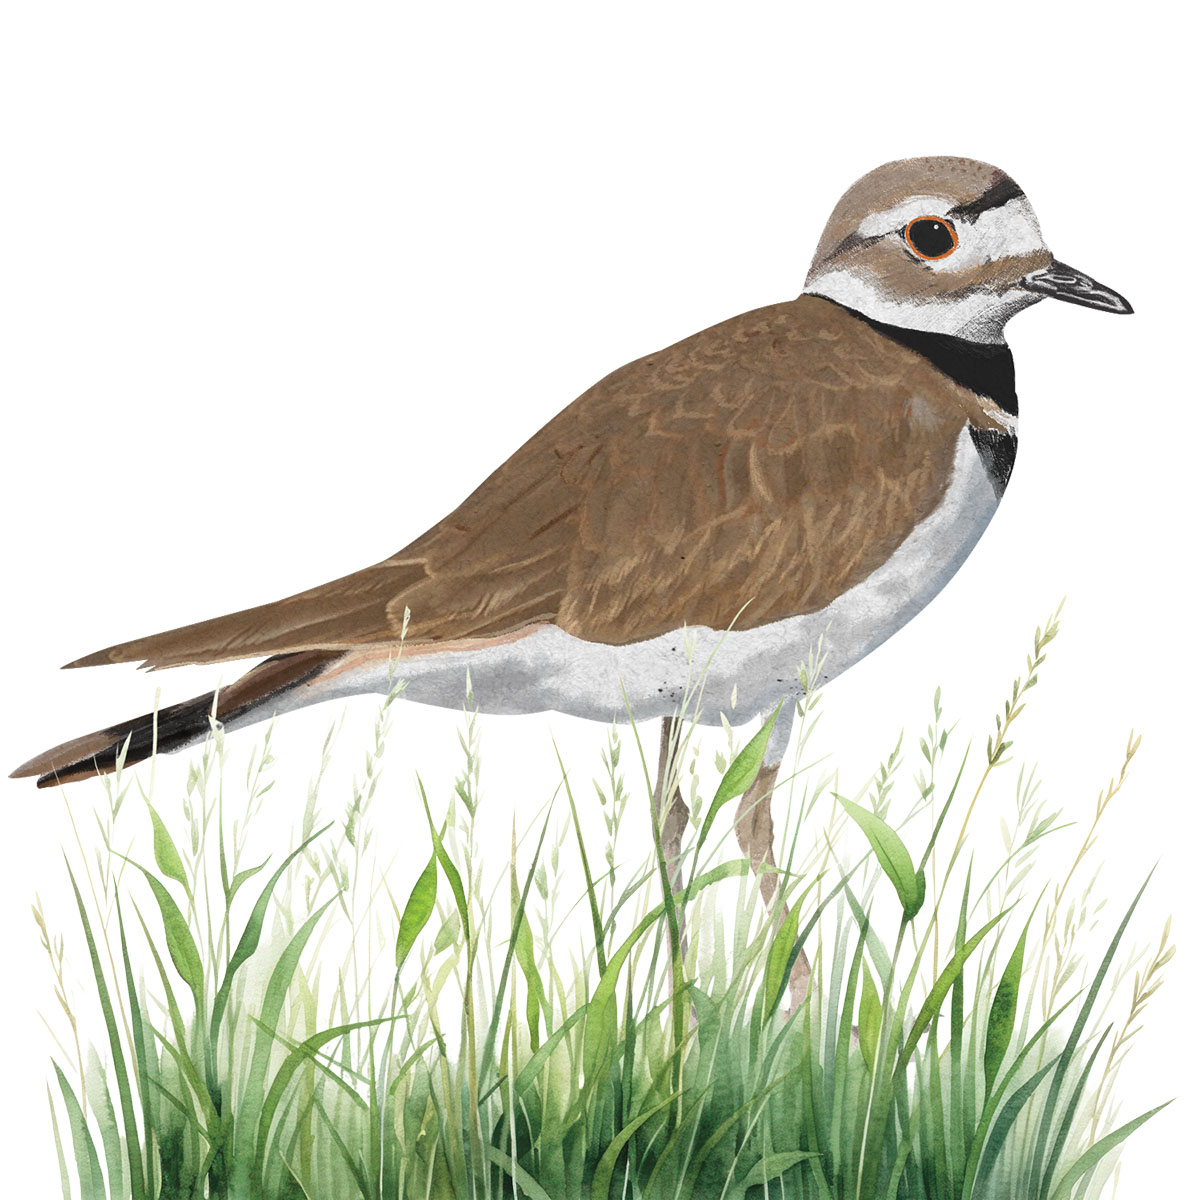 An illustration of a bird with a yellow belly and tan back and head